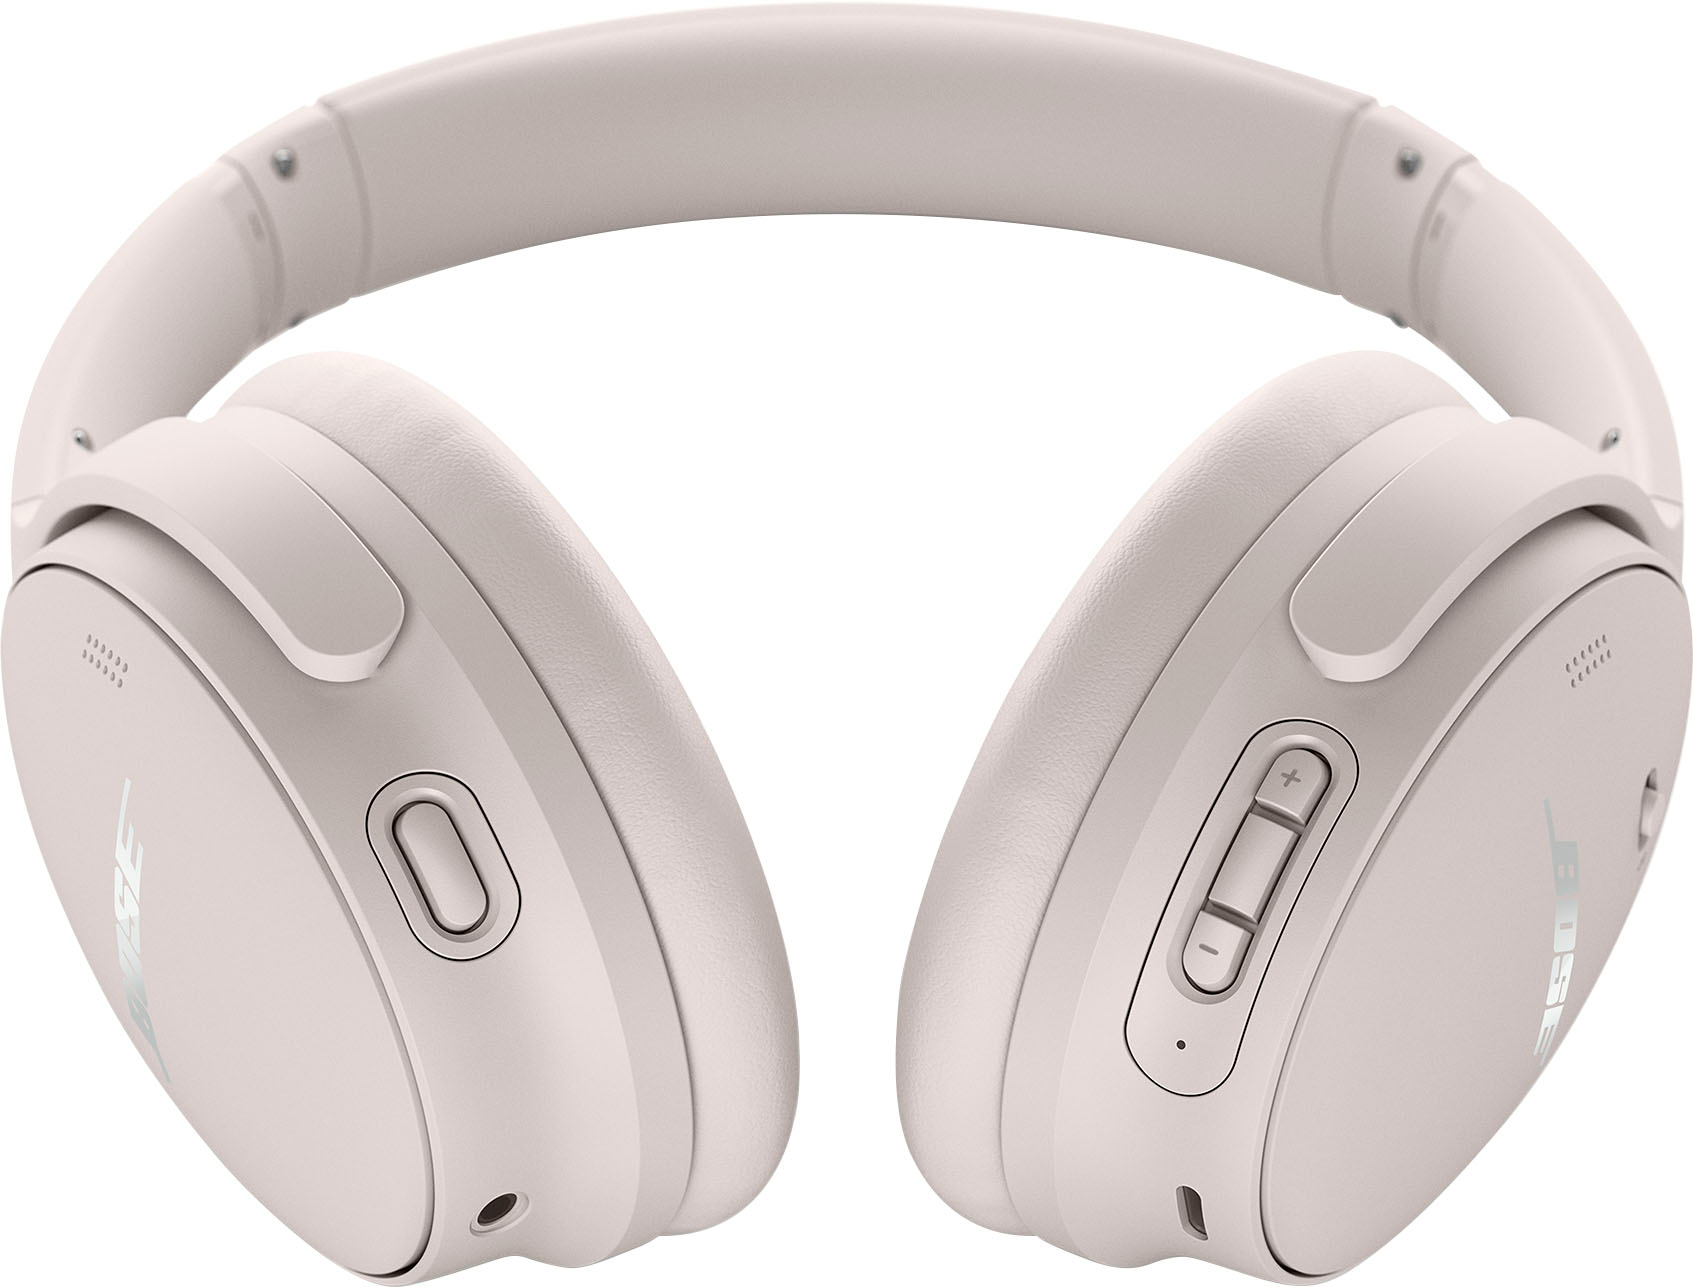 Bose QuietComfort Wireless Over-Ear Active Noise 884367-0100 B&H